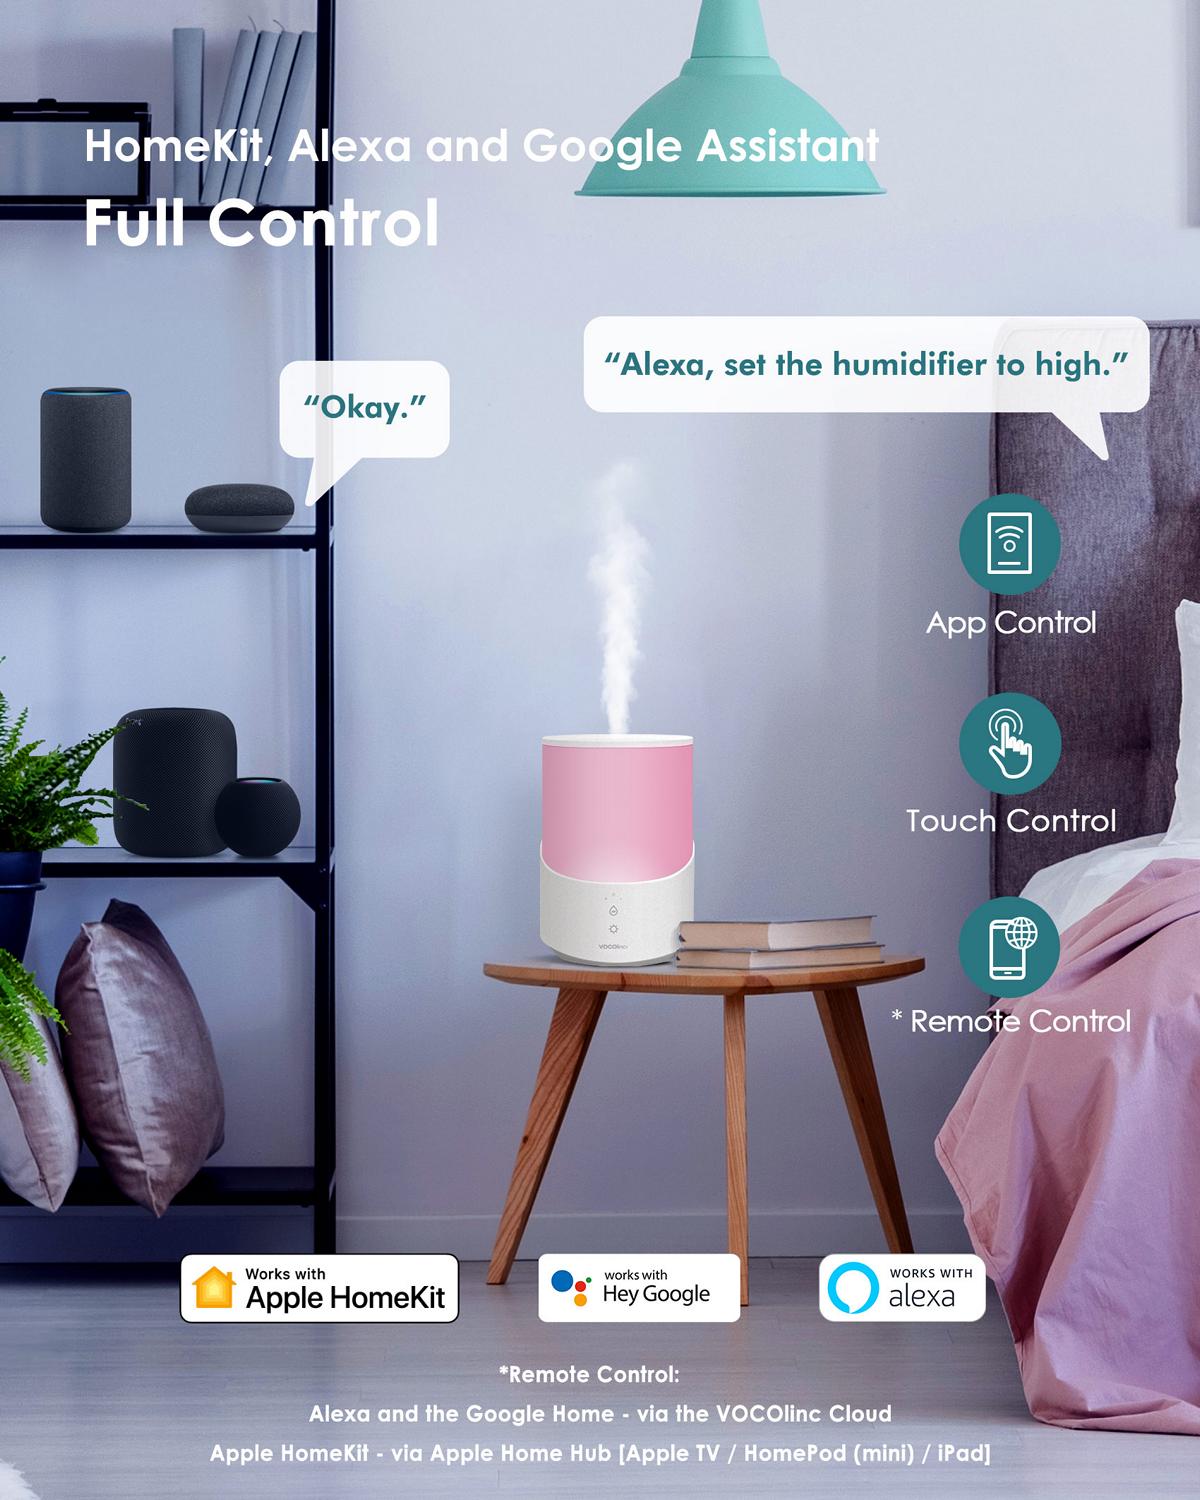 A variety of useful methods, choose voice control.app control, touch control, or remote control according to your needs.